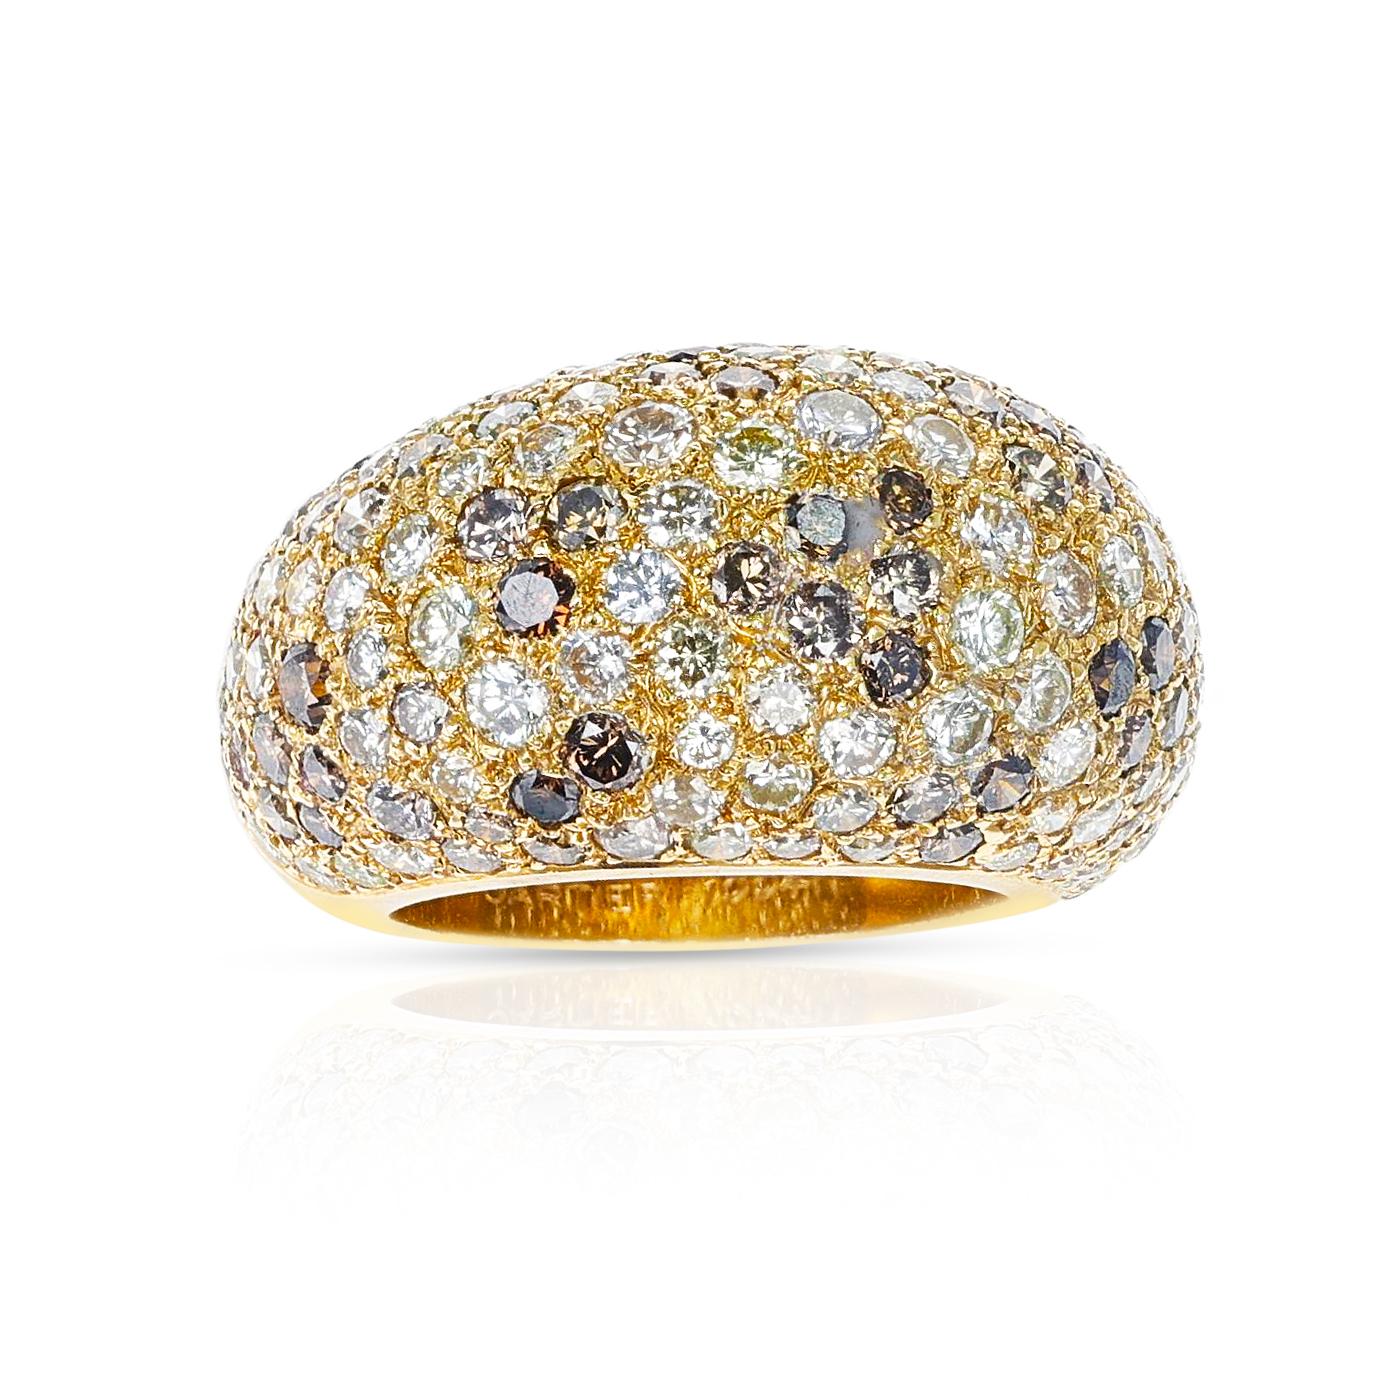 A Cartier Fancy Color Diamonds Bombé Ring with diamonds colors such as brown and white. Has a pair of Matching Earrings. The diamonds weigh appx. 4 carats. The ring size is US 6.25. Signed Cartier. 

